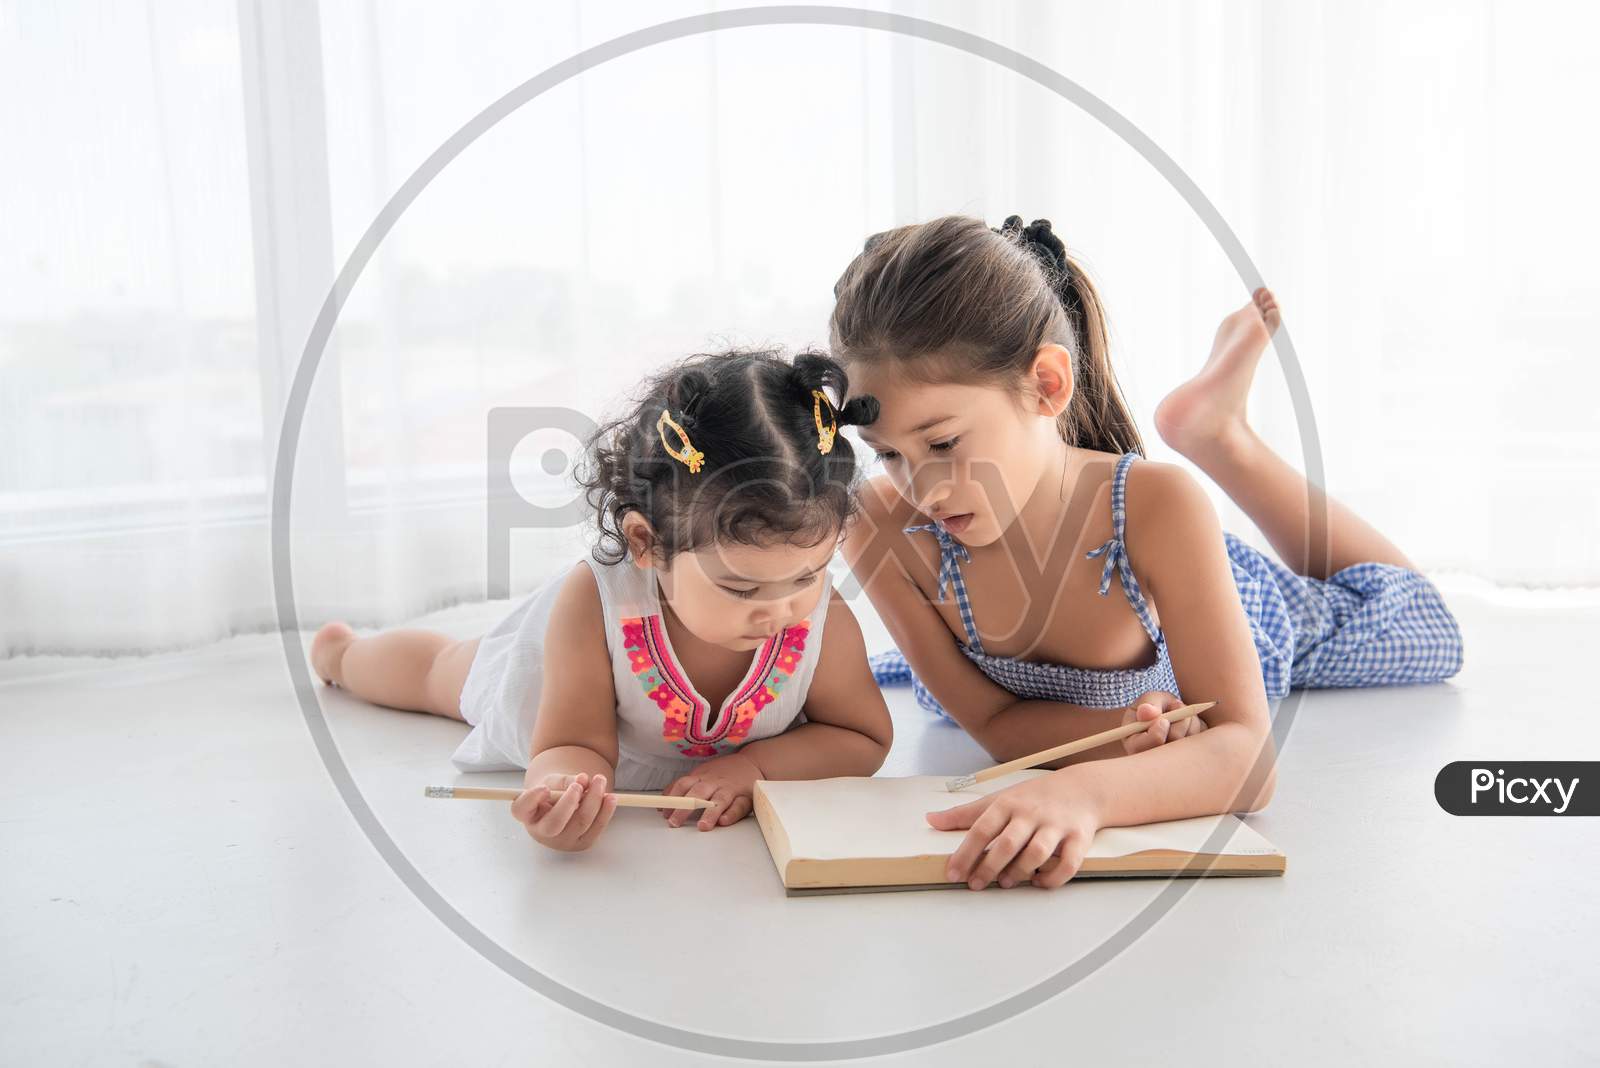 Happy Two Sister Drawing In Sketch Book Together At Home. People Lifestyle And Kids Play. Education And Children Concept. Diverse Ethnicities And Ages